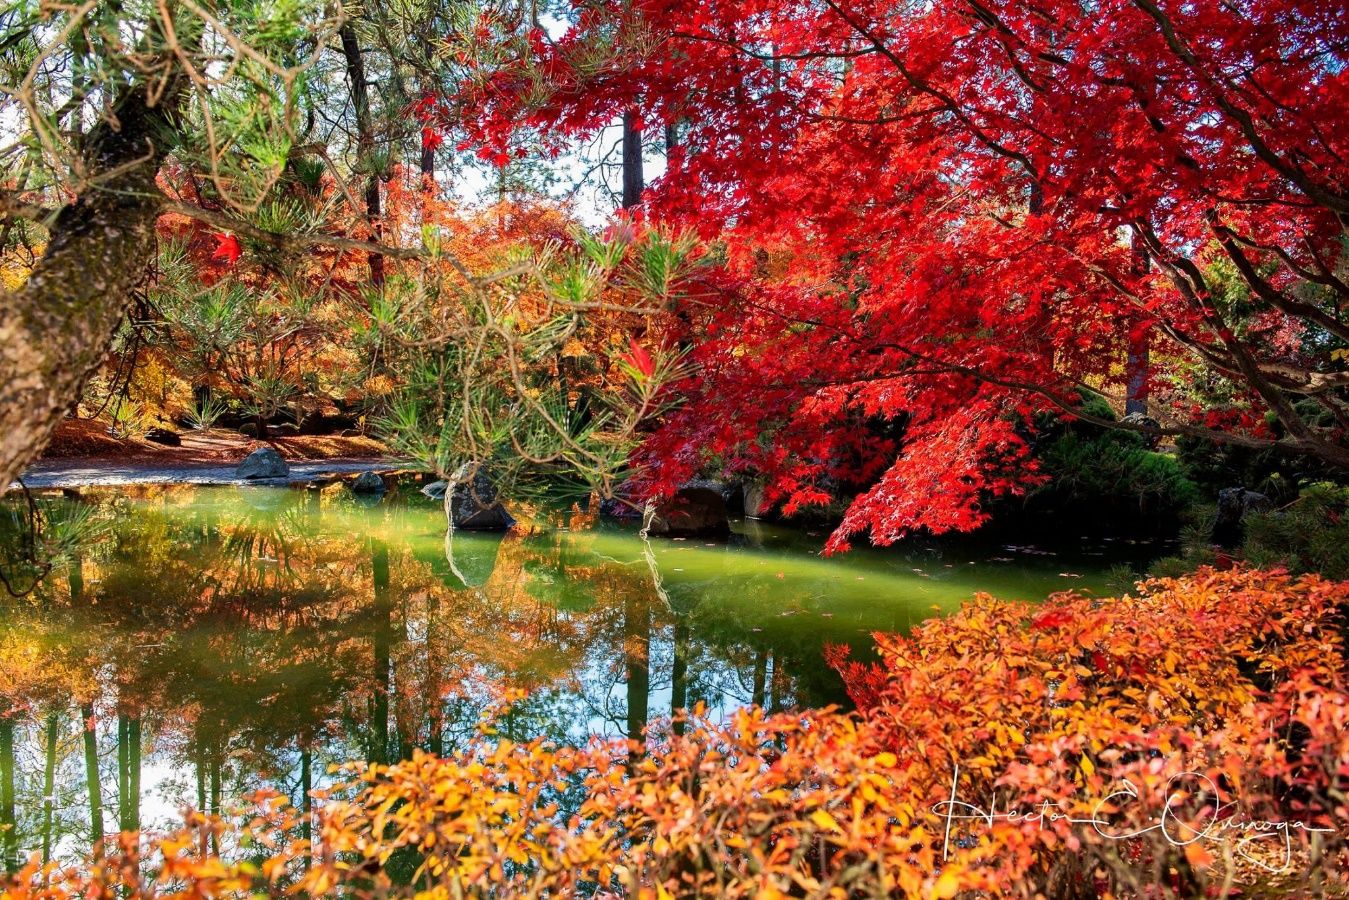 A pond with red and orange leaves Description automatically generated